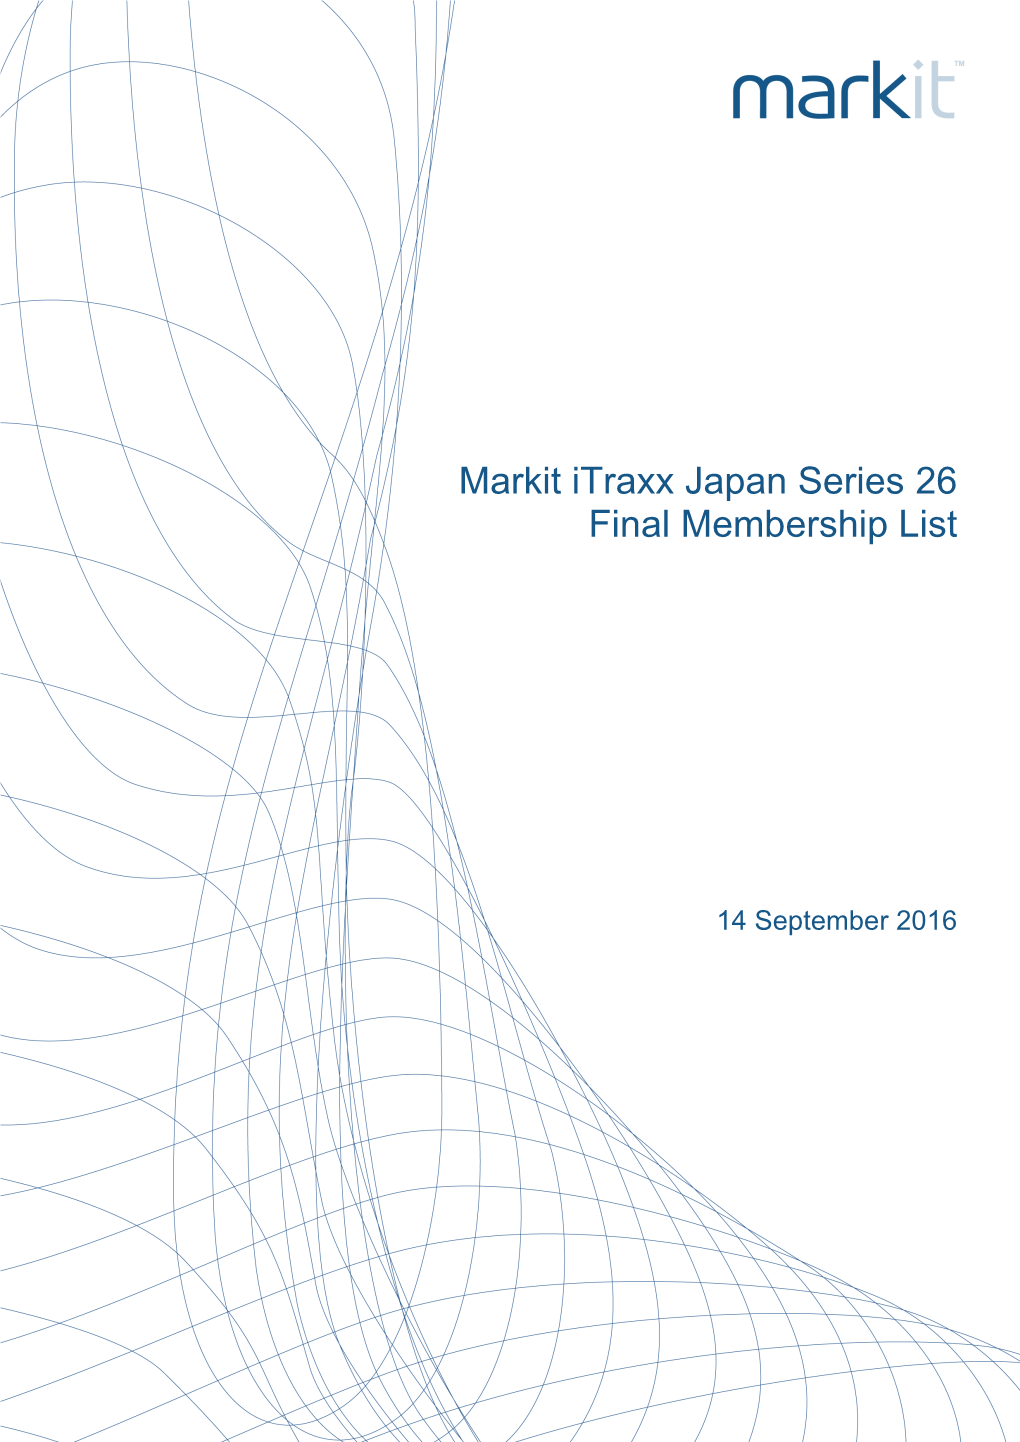 Markit Itraxx Japan Series 26 Coupon and Recovery Rates